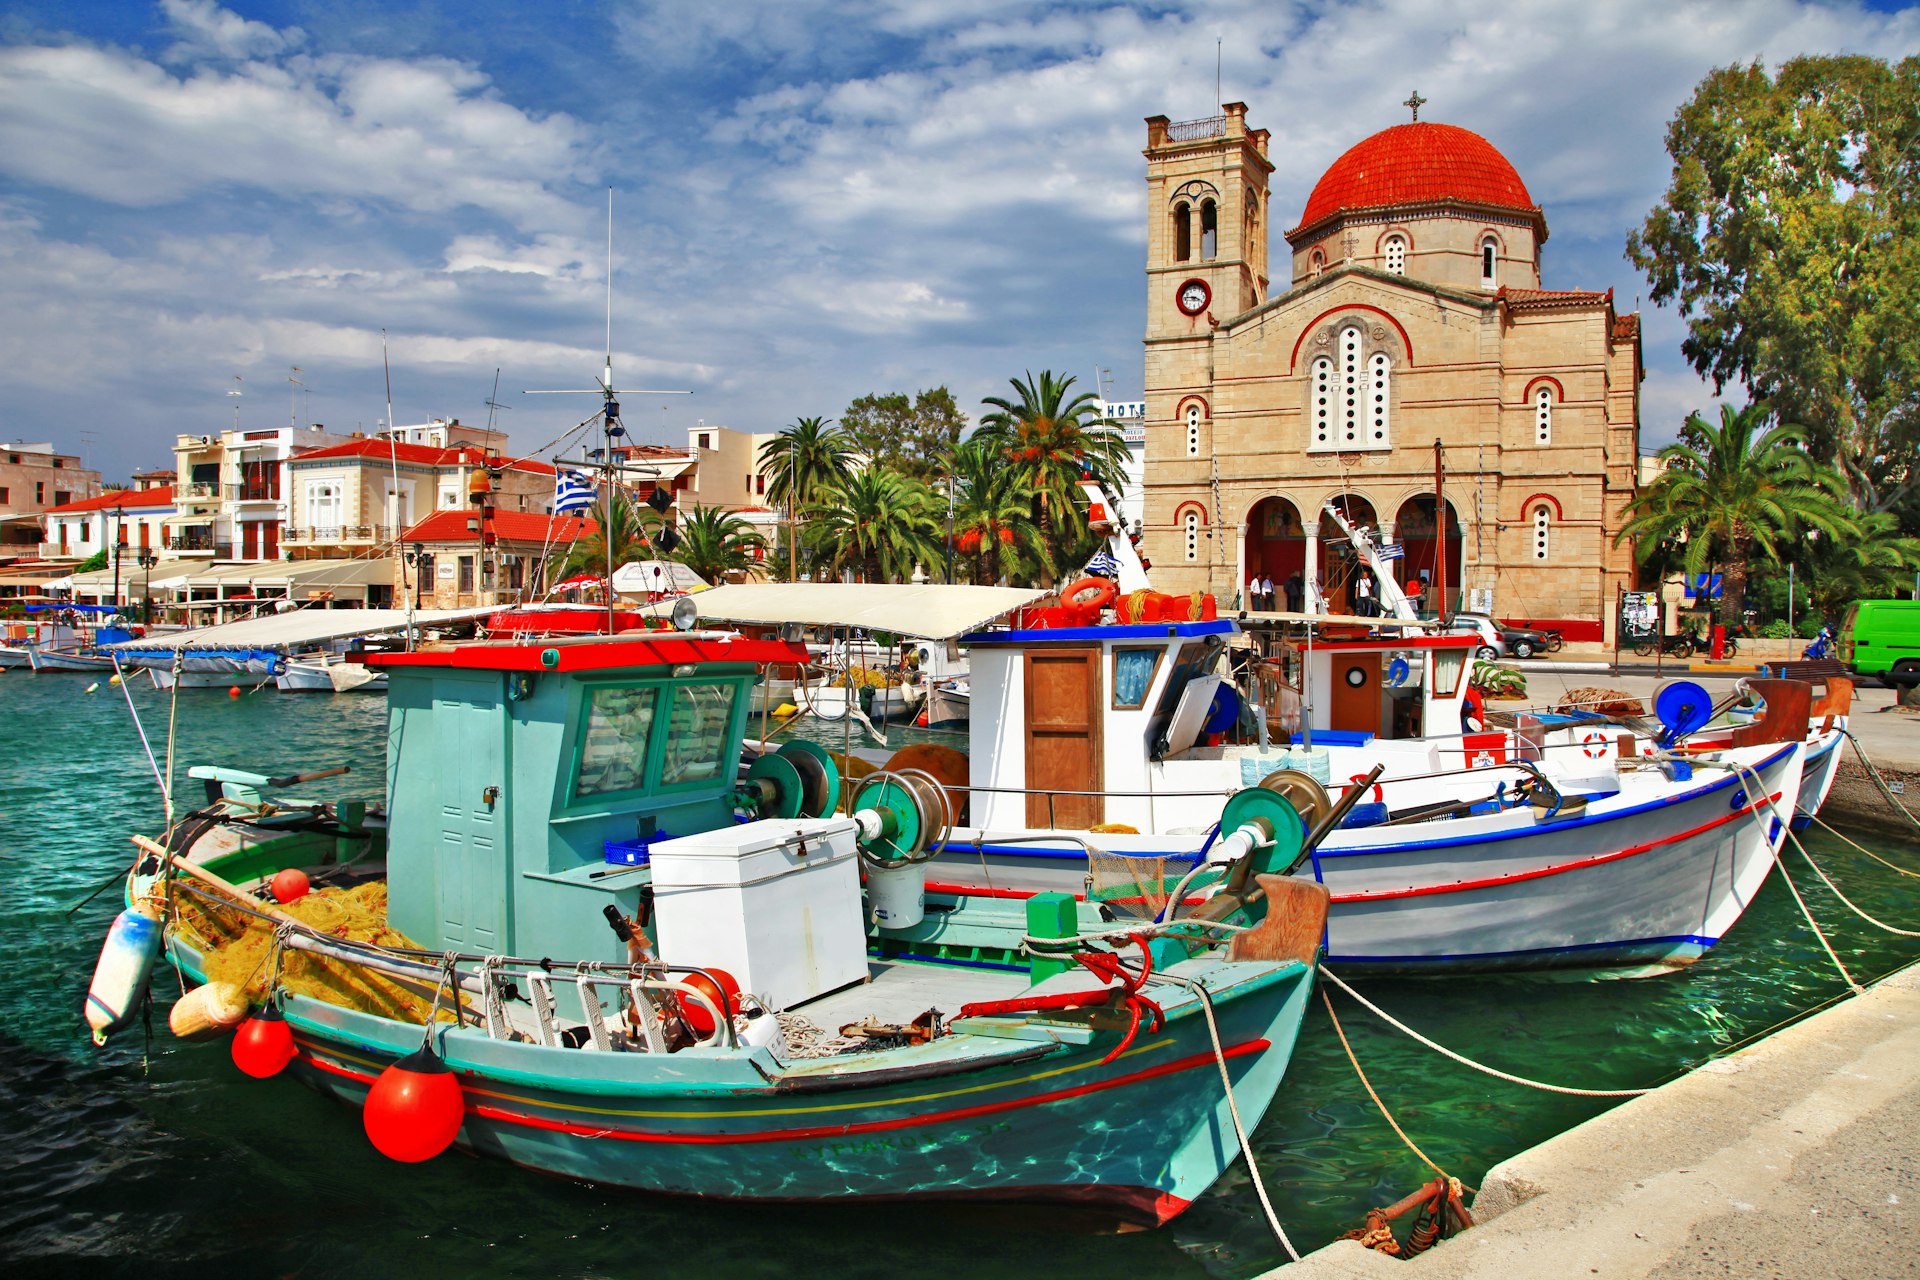 Colorful wooden boats docked in a small island harbor